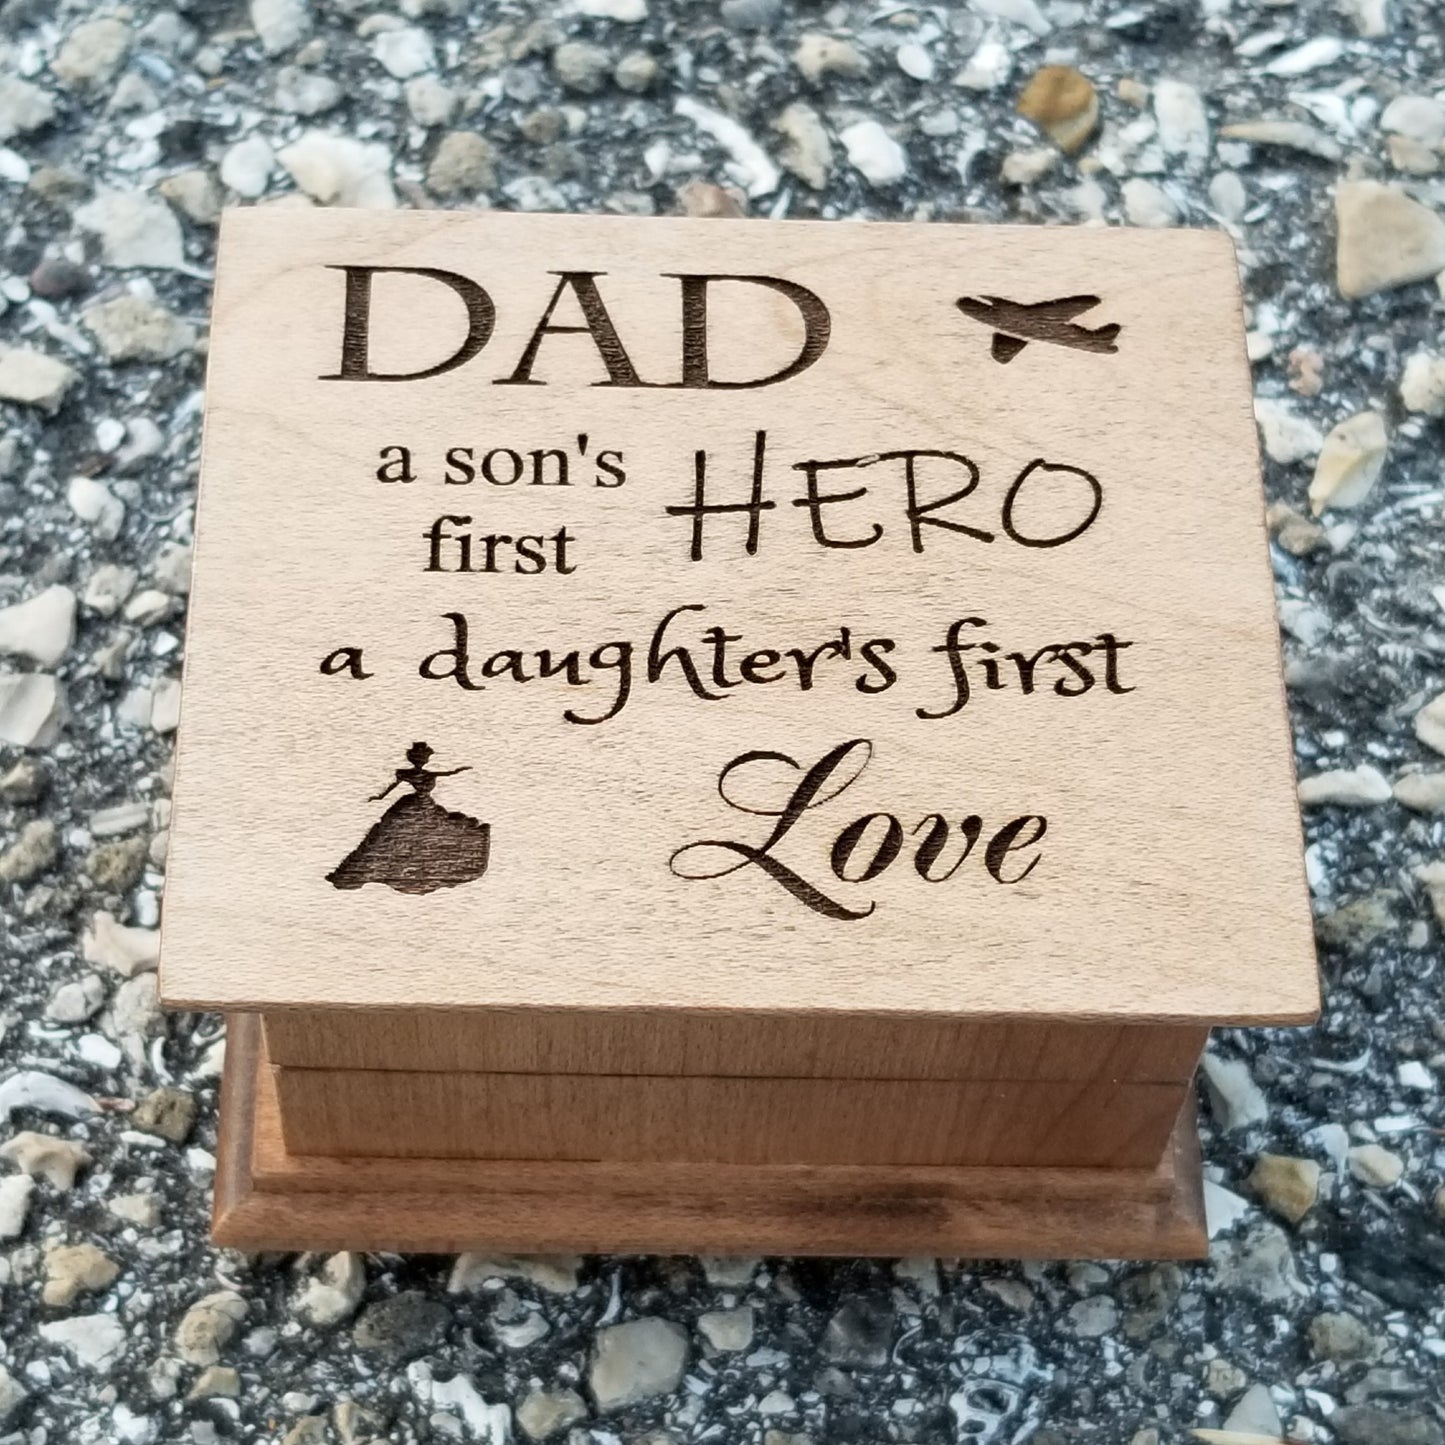 Dad a son's first Hero a daughter's first love engraved music box